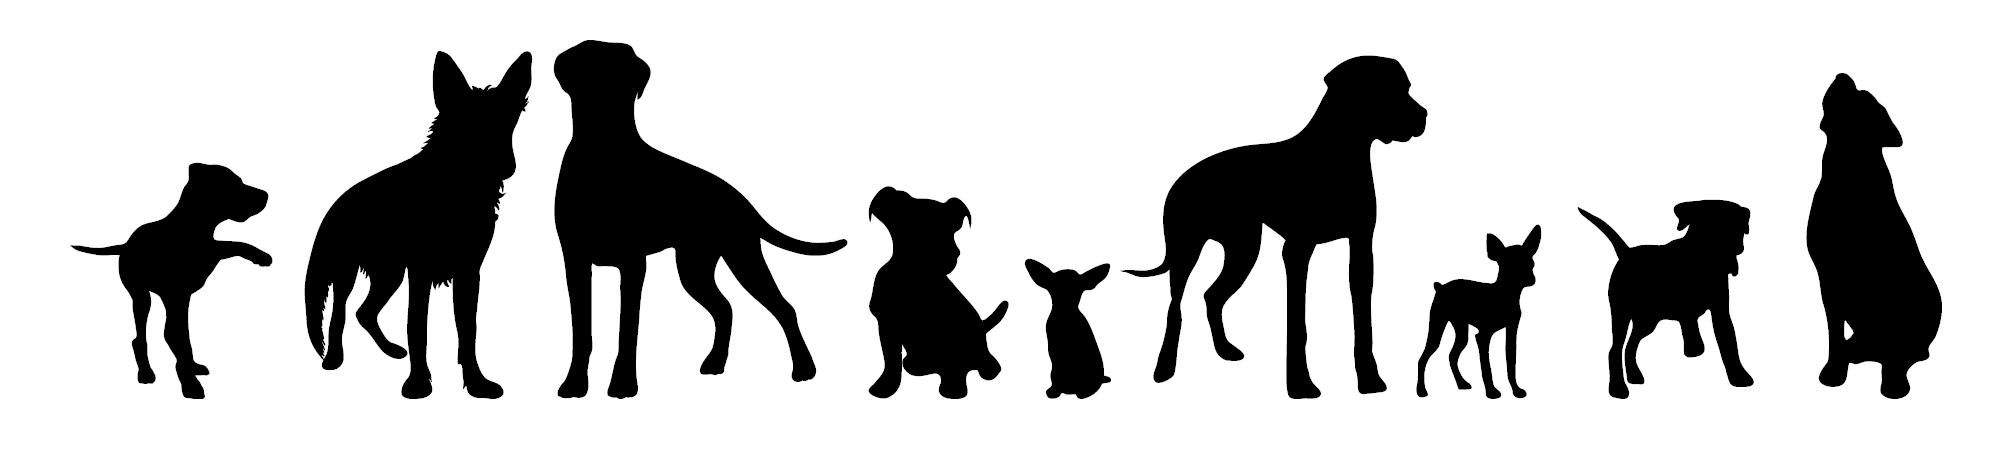 Dog breeds in silhouette